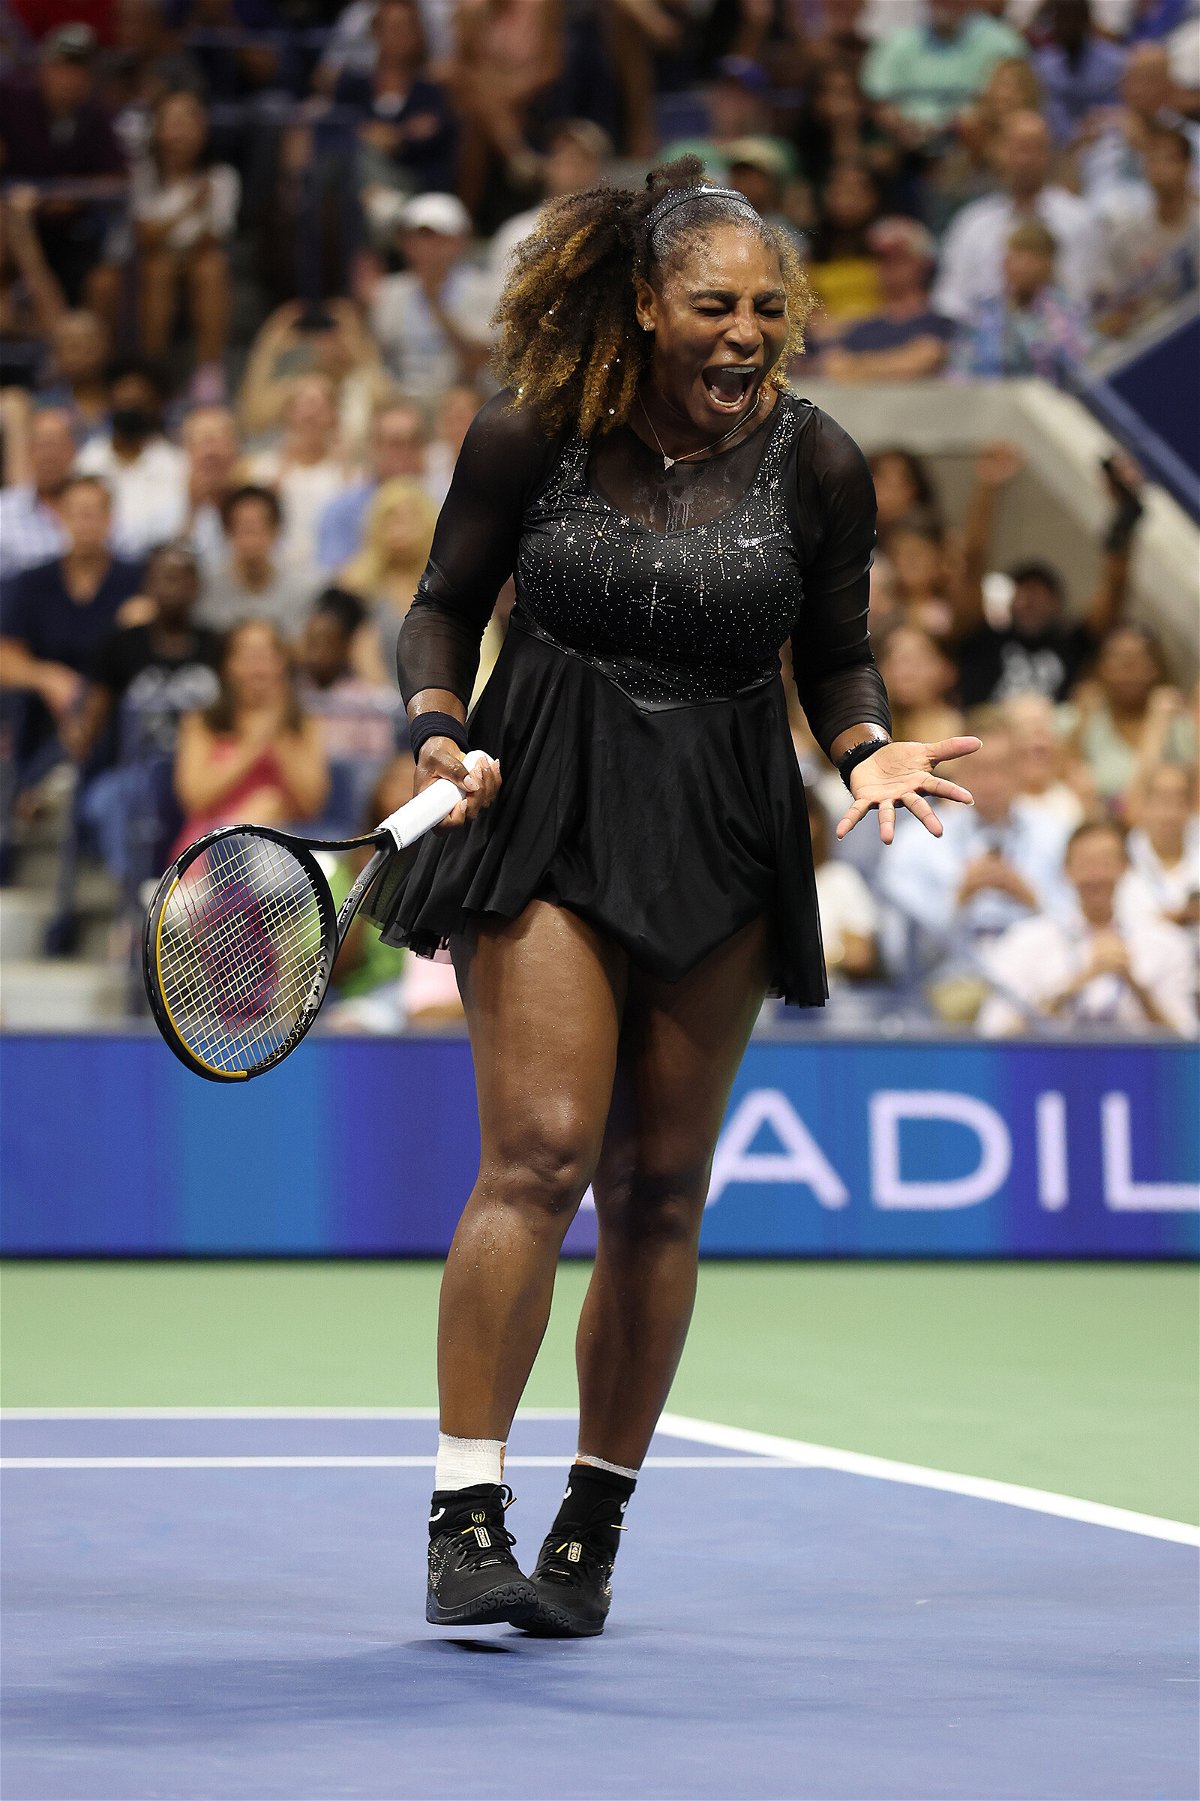 Look of the Week Serena Williams bedazzled US Open outfit